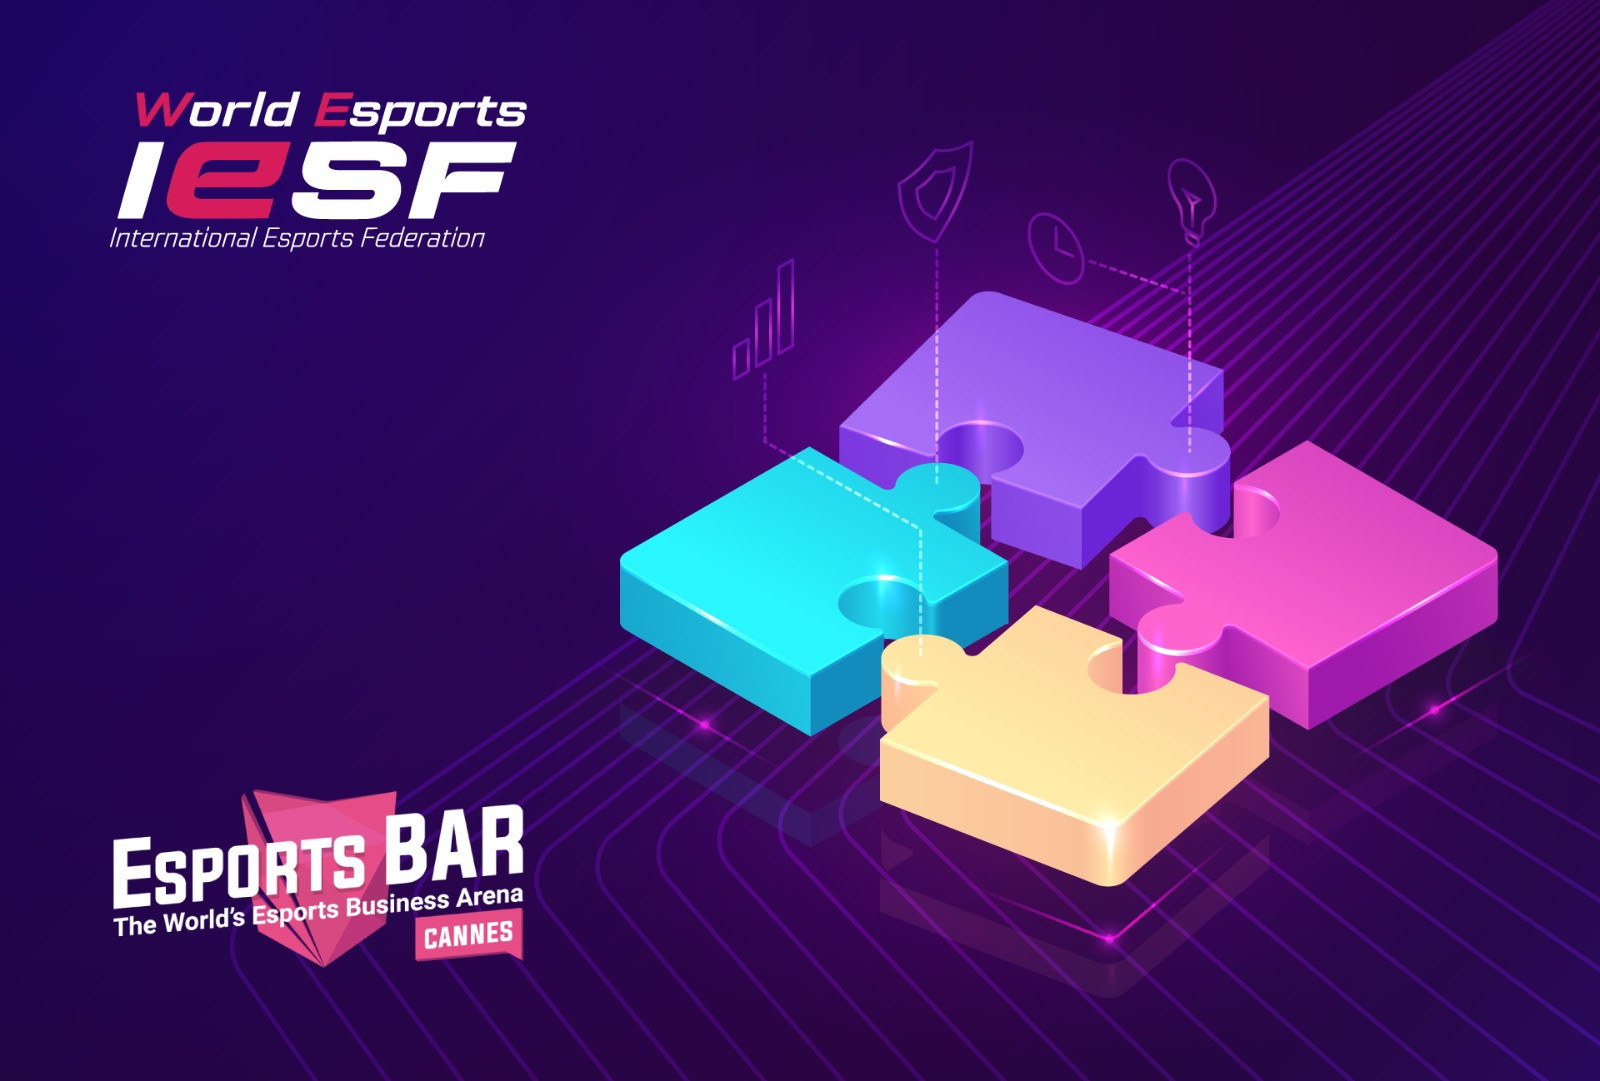 The IESF and Esports BAR have announced a new global partnership ©IESF